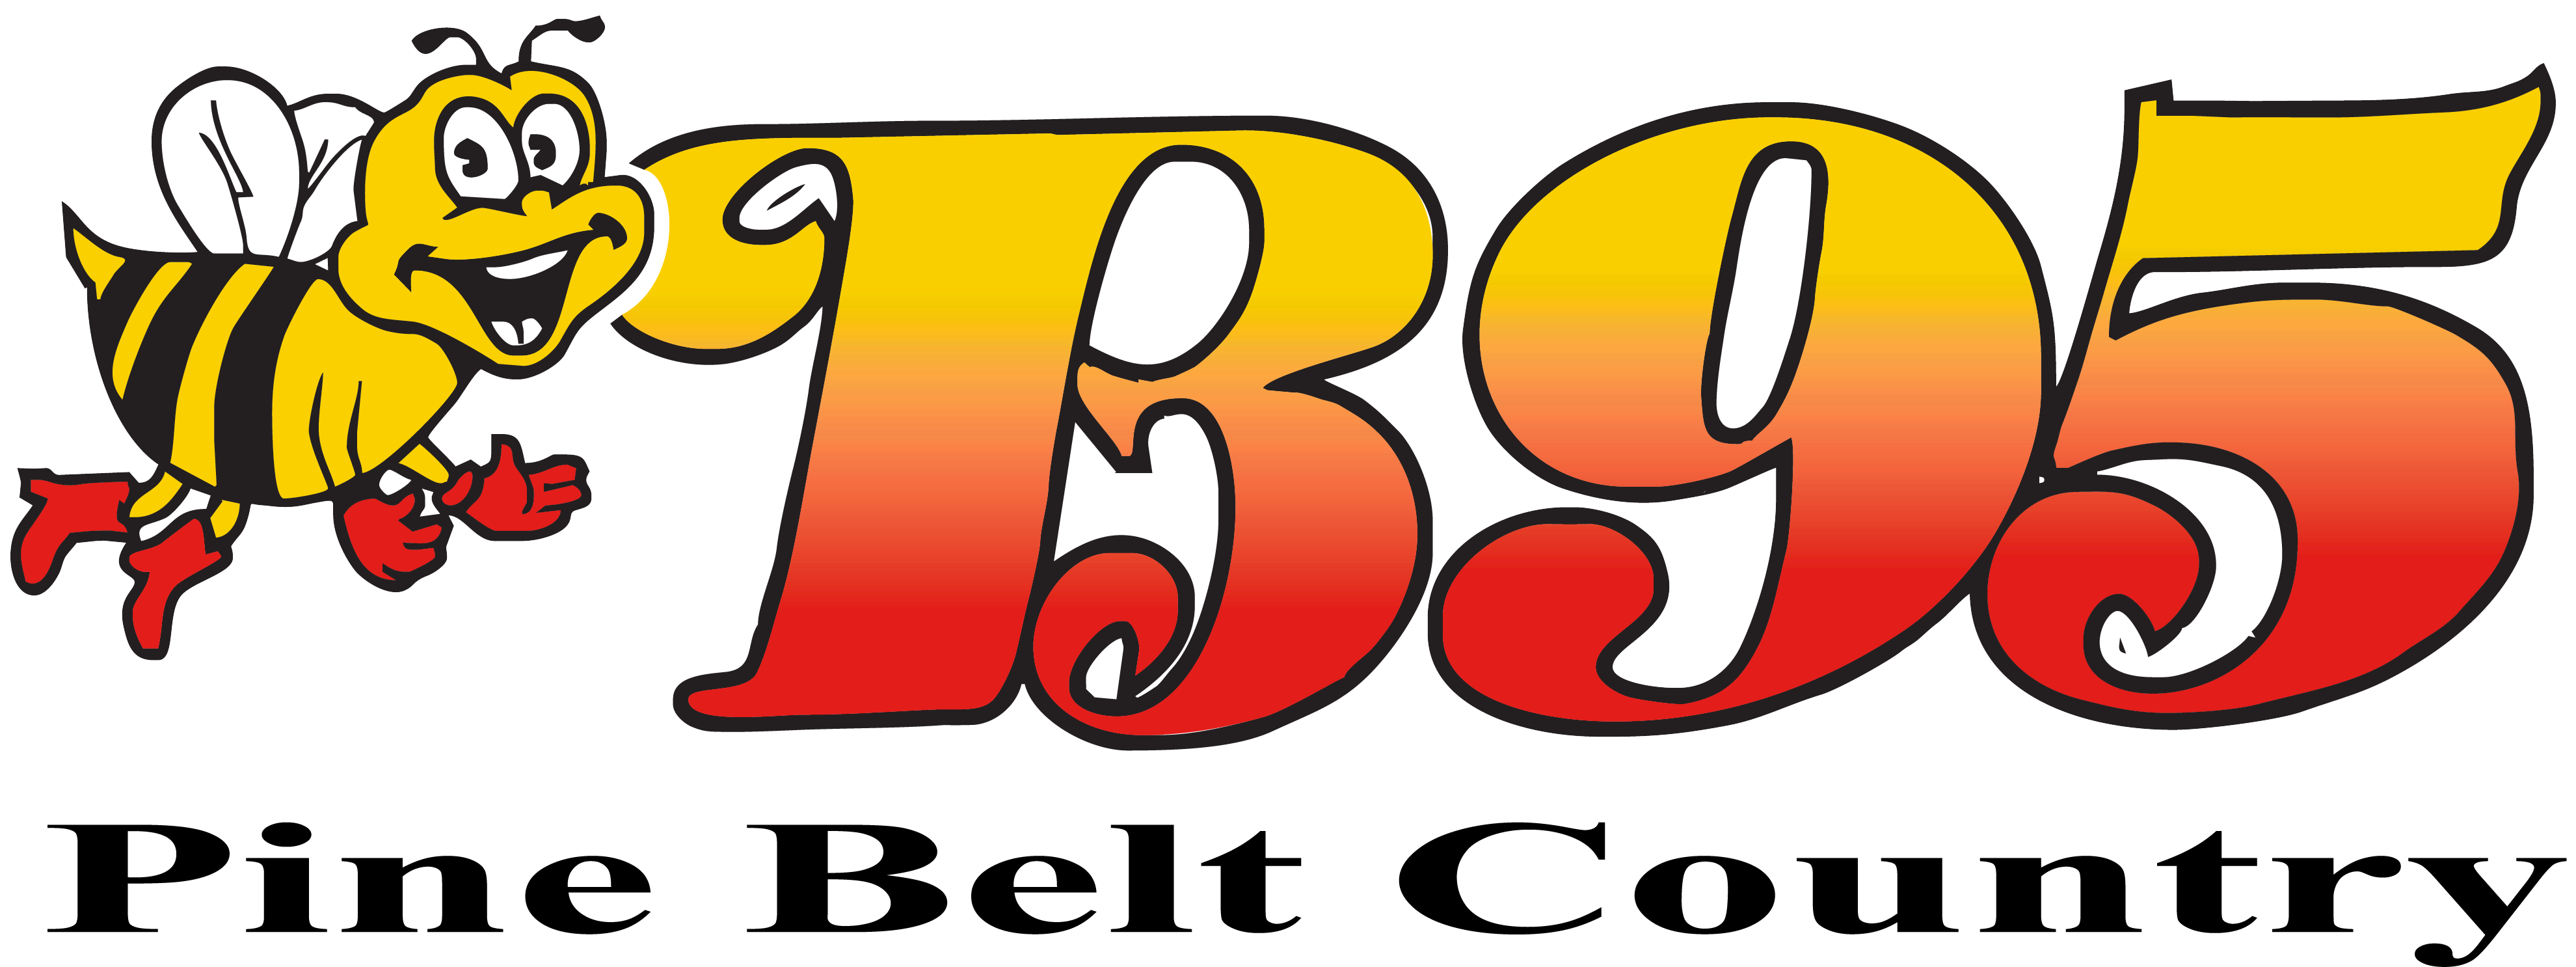 B95 Country